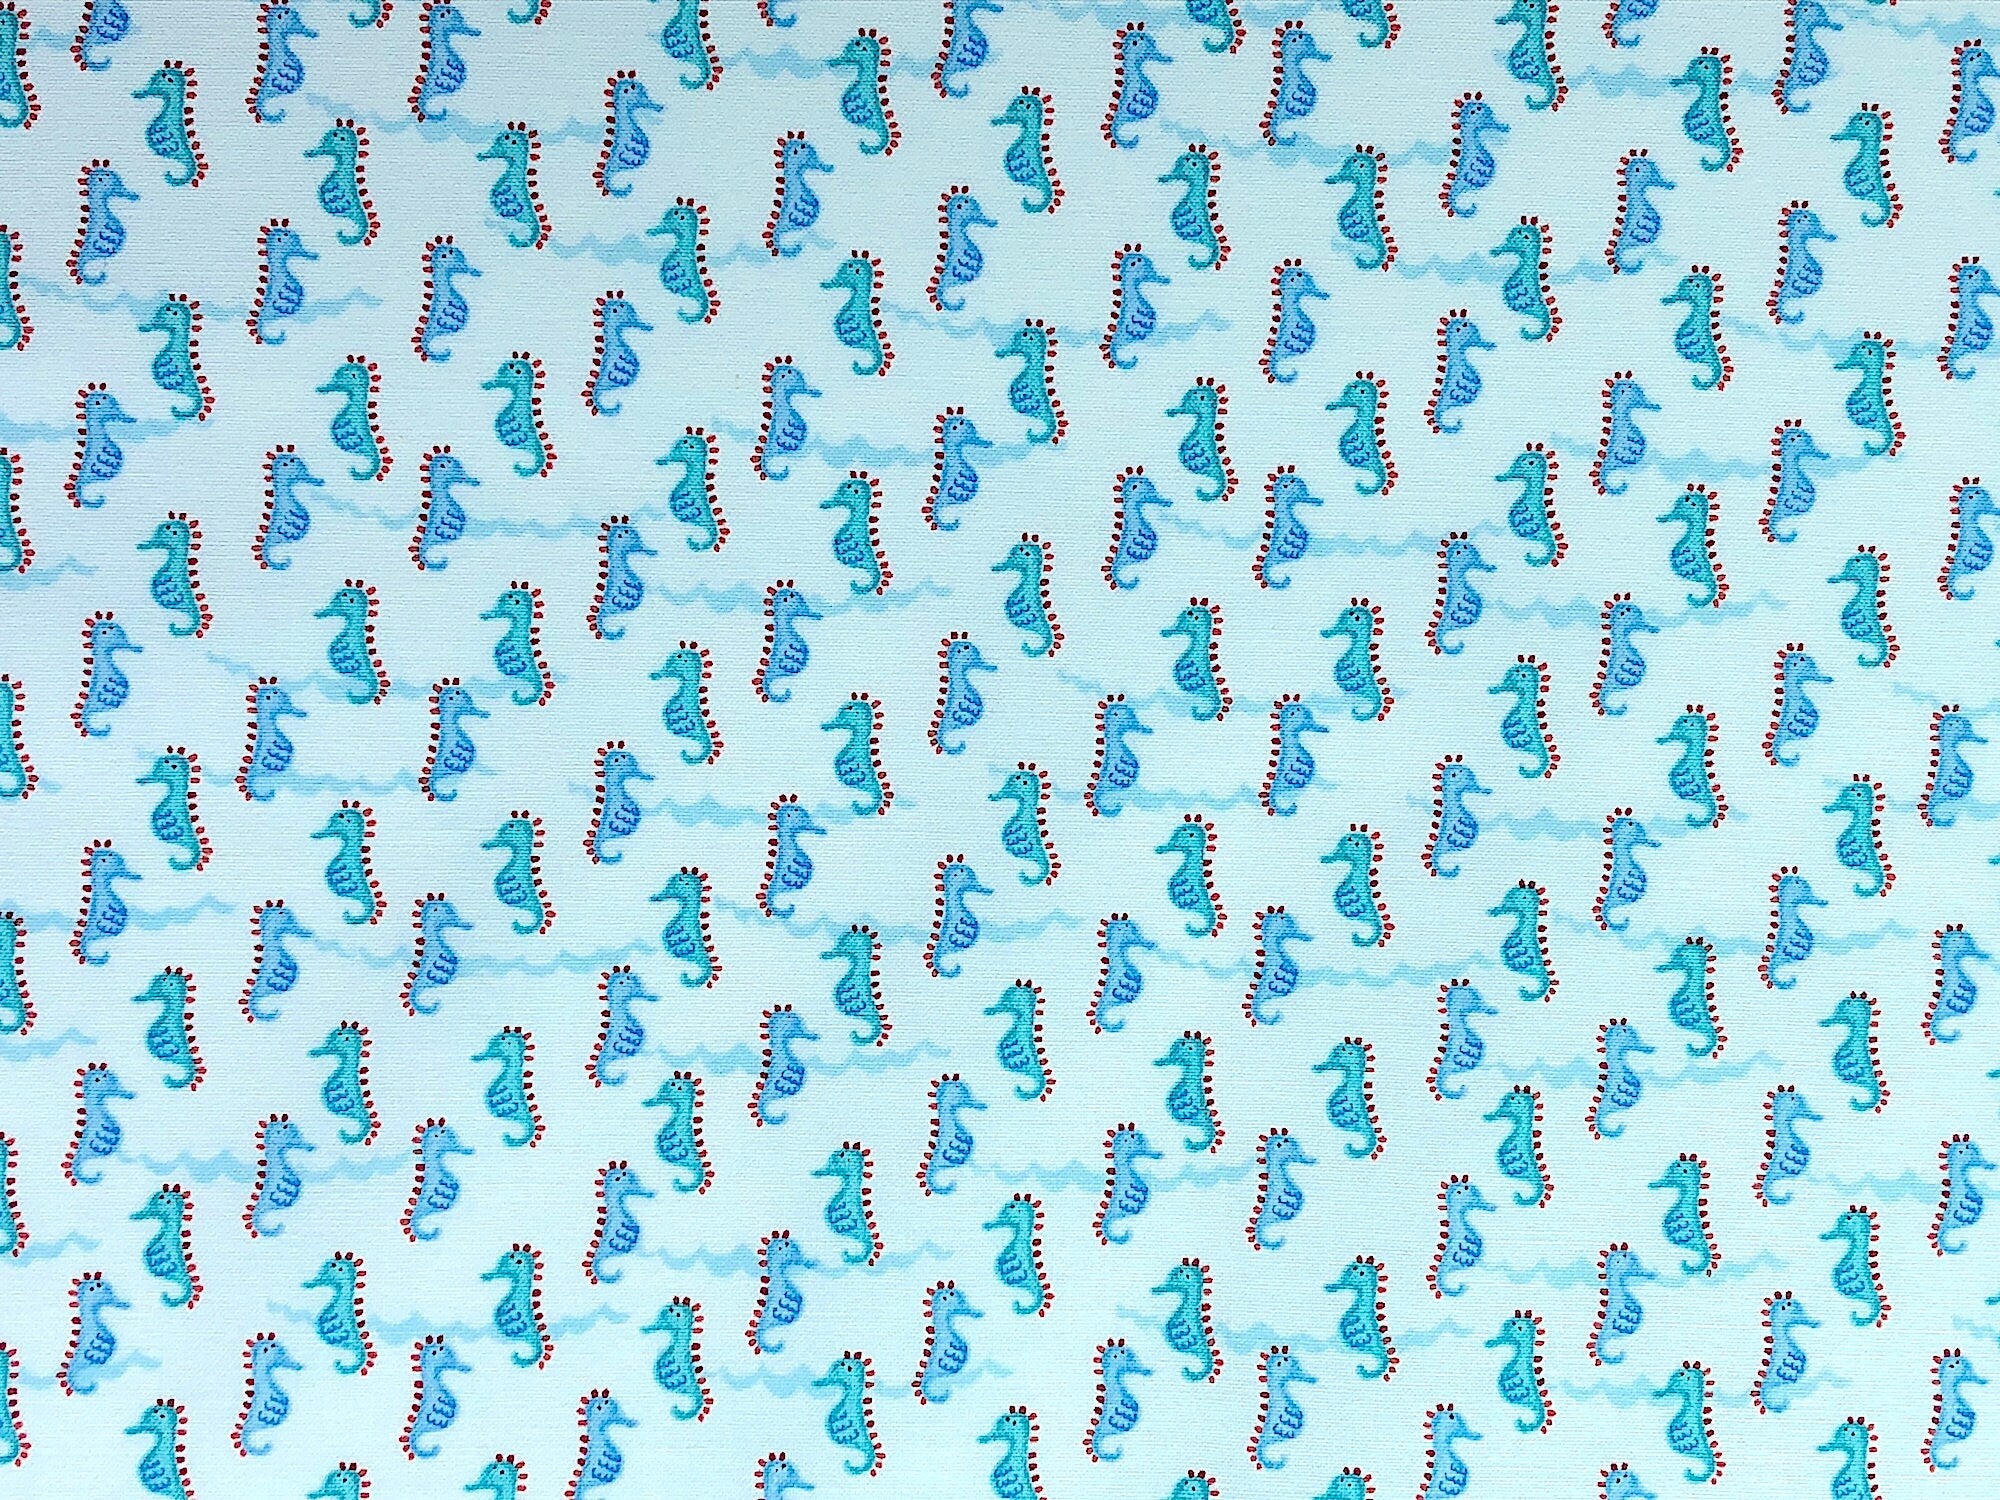 This sea life fabric is covered with Sea Horses moving back and forth on the fabric.